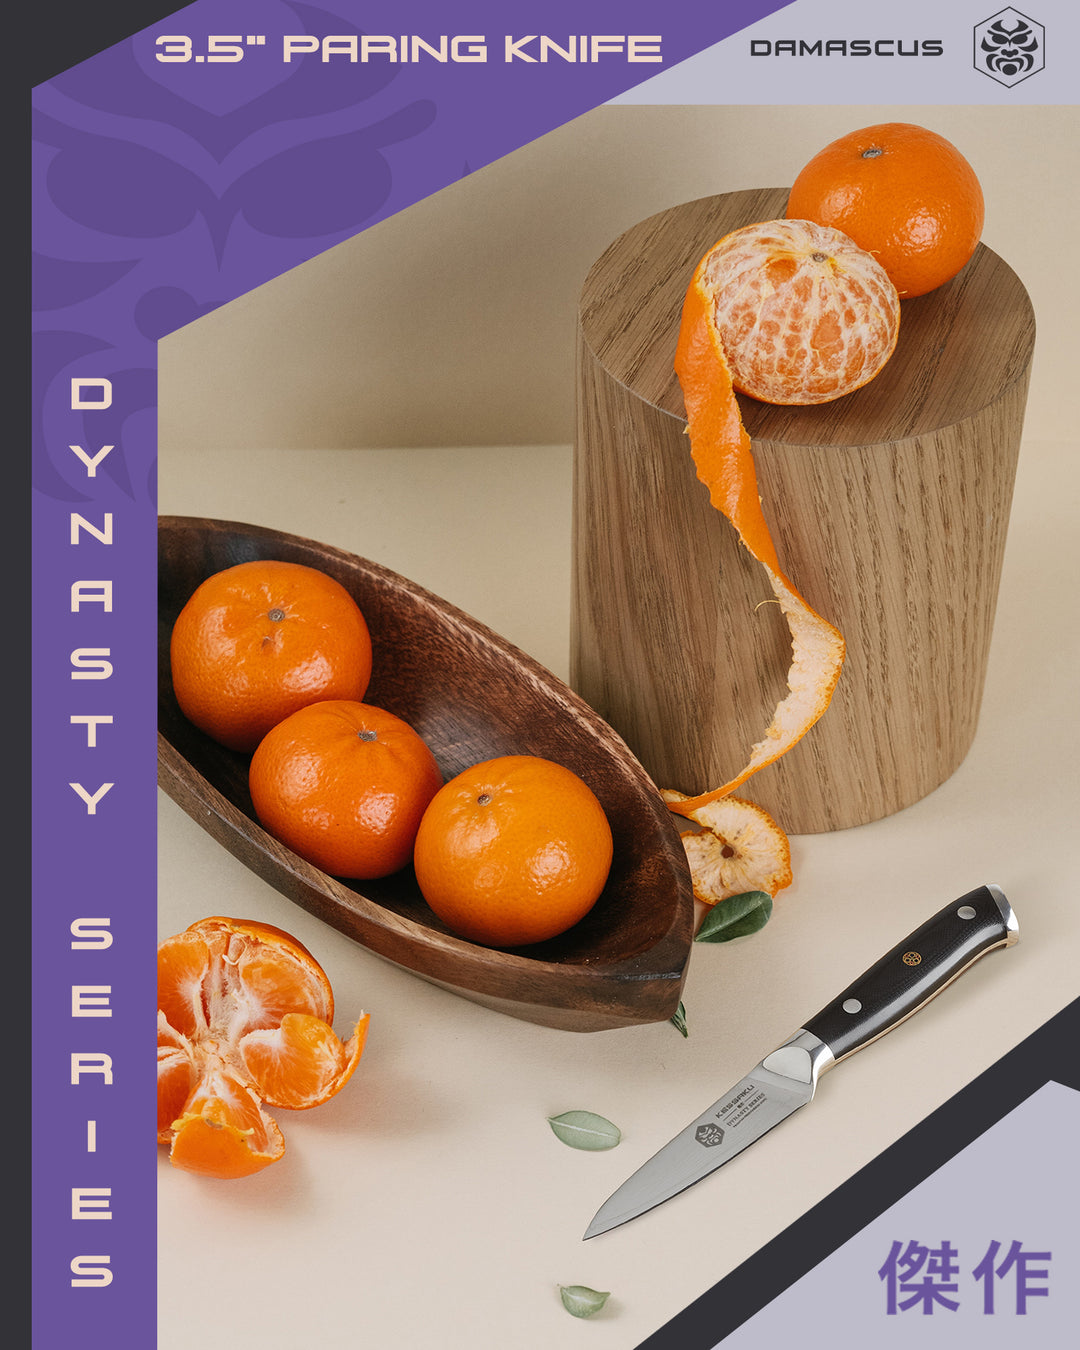 Useful ways to peel or slice an orange with the Damascus Paring Knife